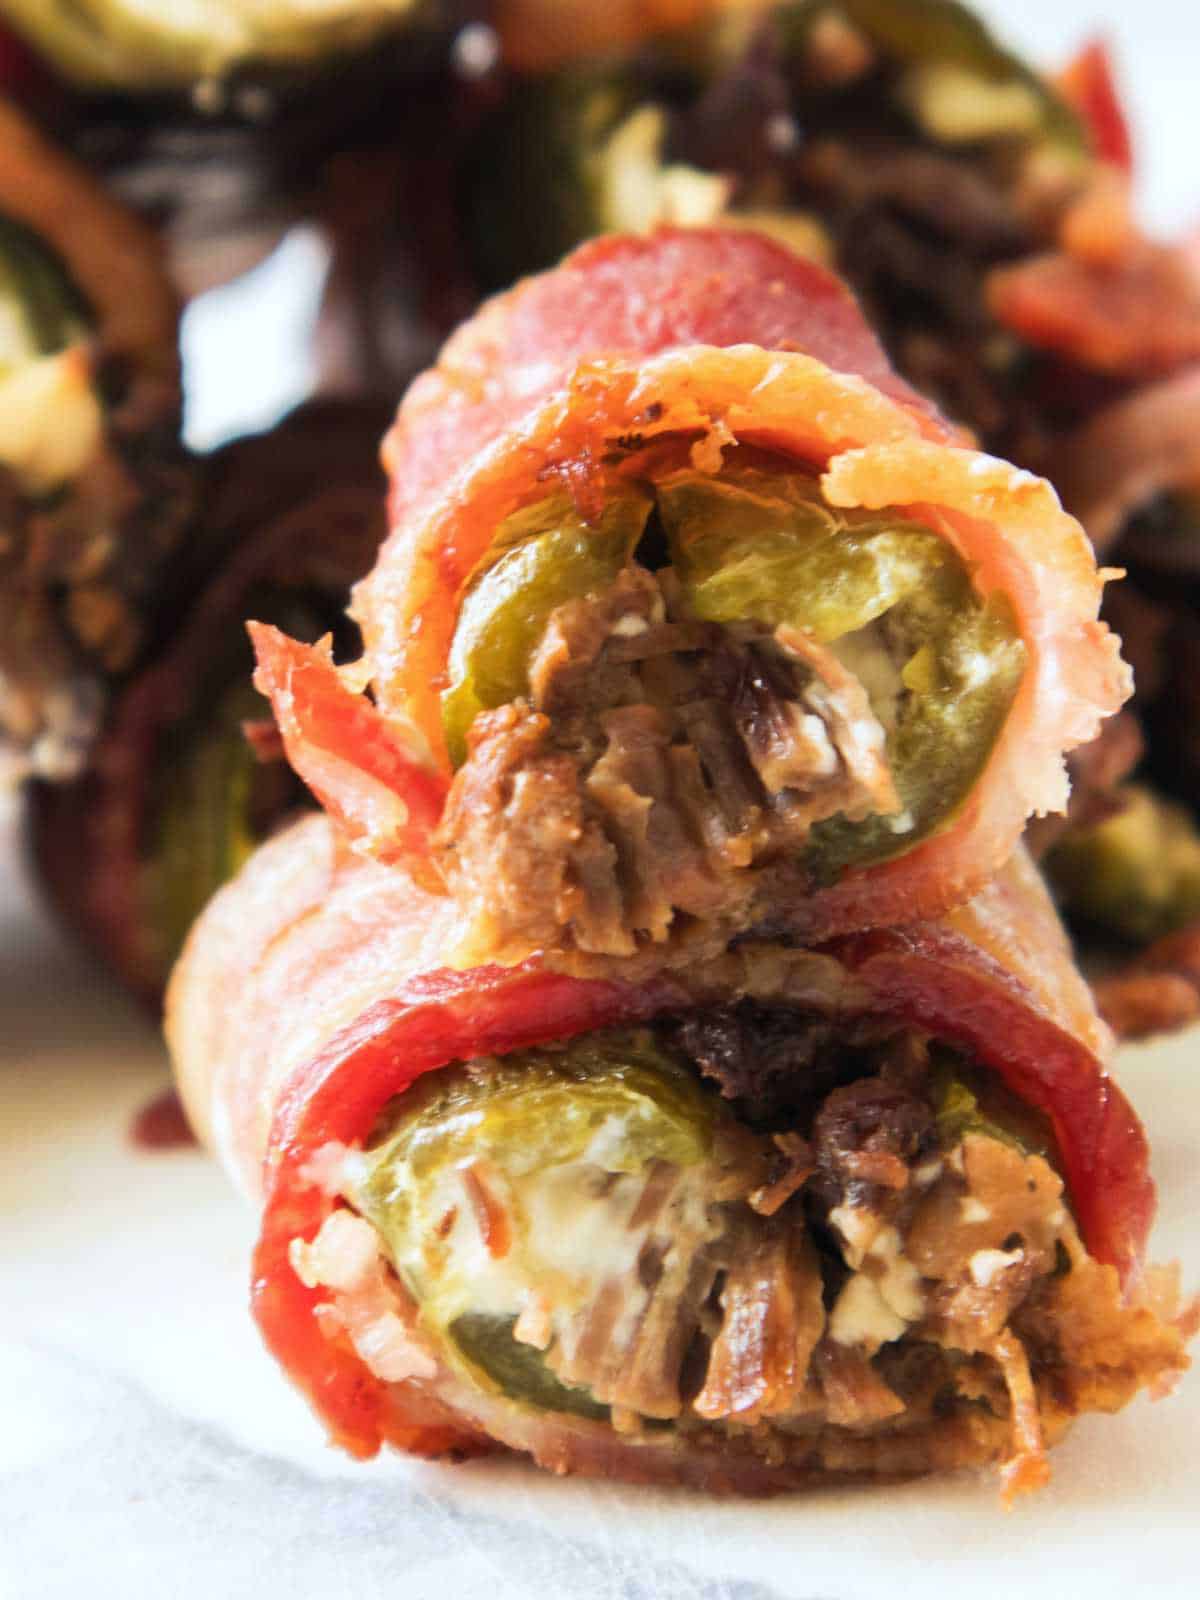 crisp bacon wrapped stuffed jalapeno peppers. traeger smoker recipes